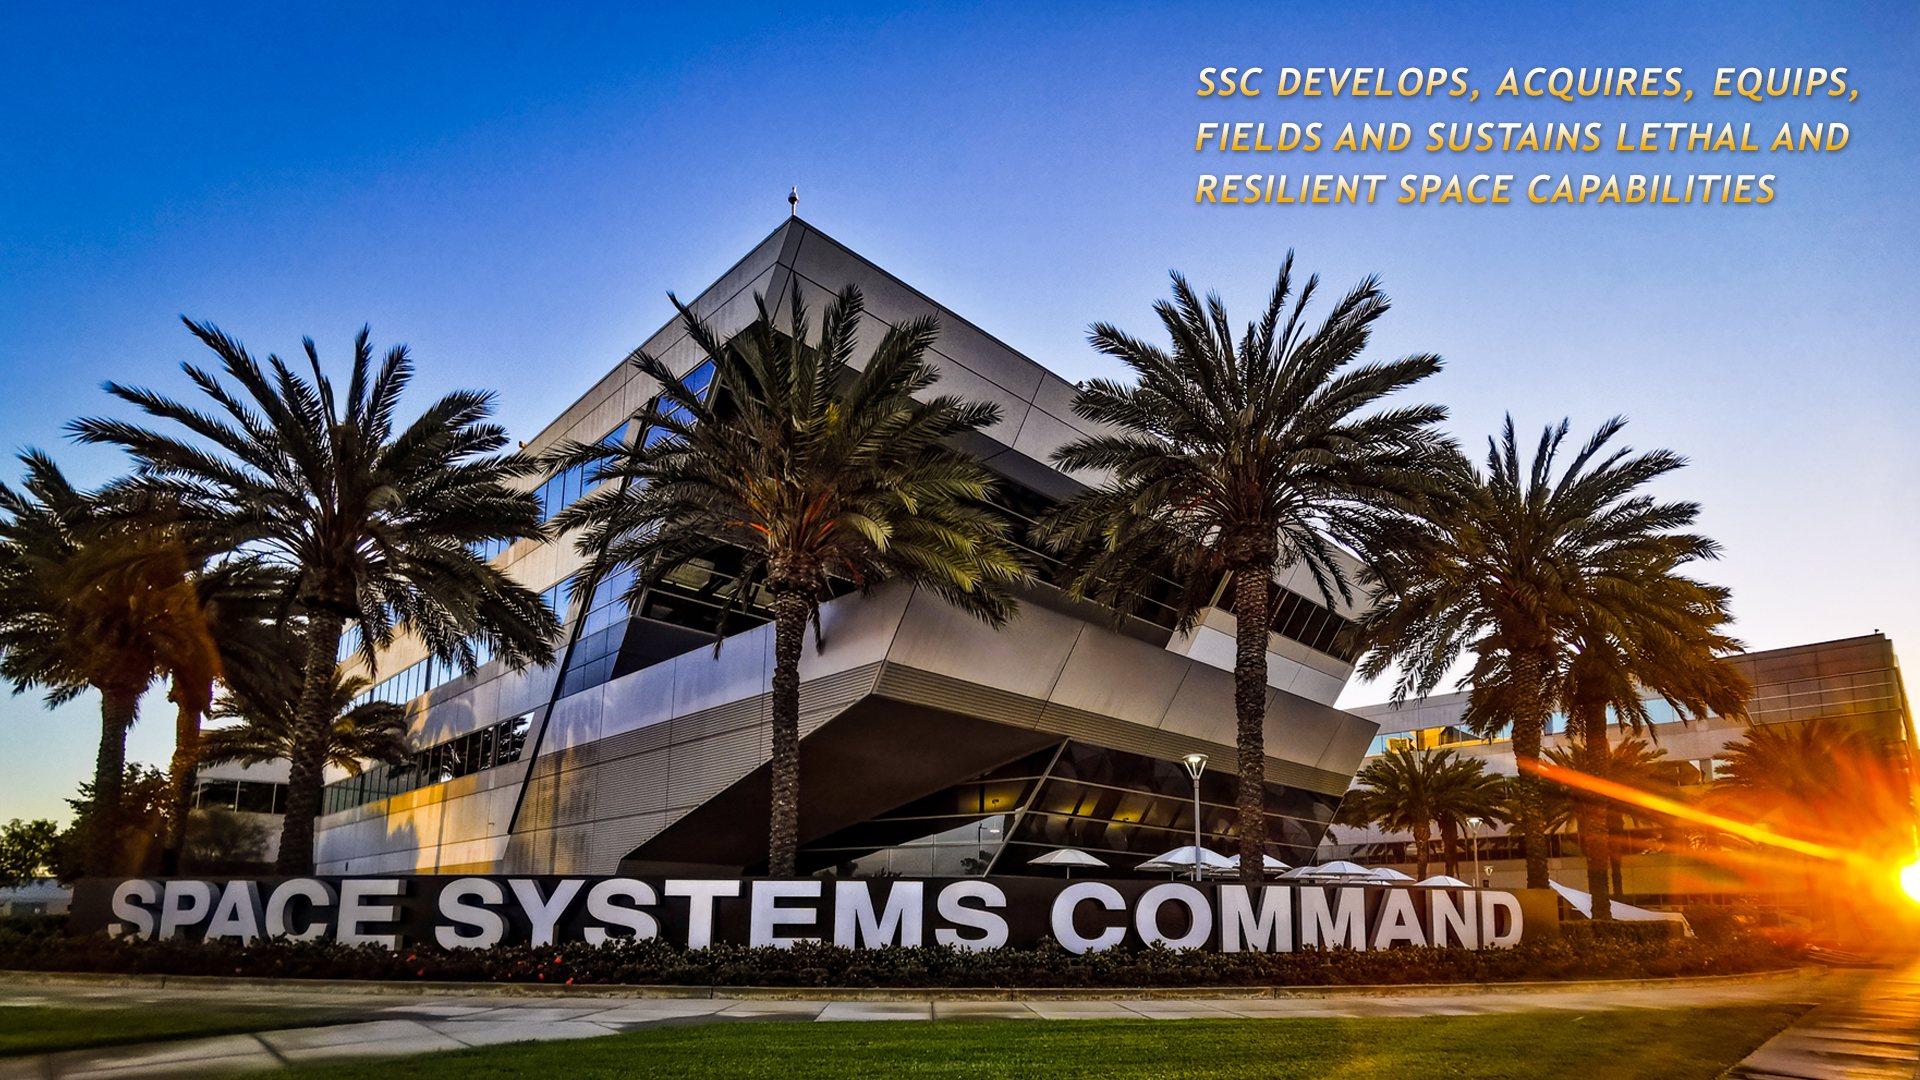 SSC develops, acquires, equips, fields, and sustains lethal and resilient space capabilities